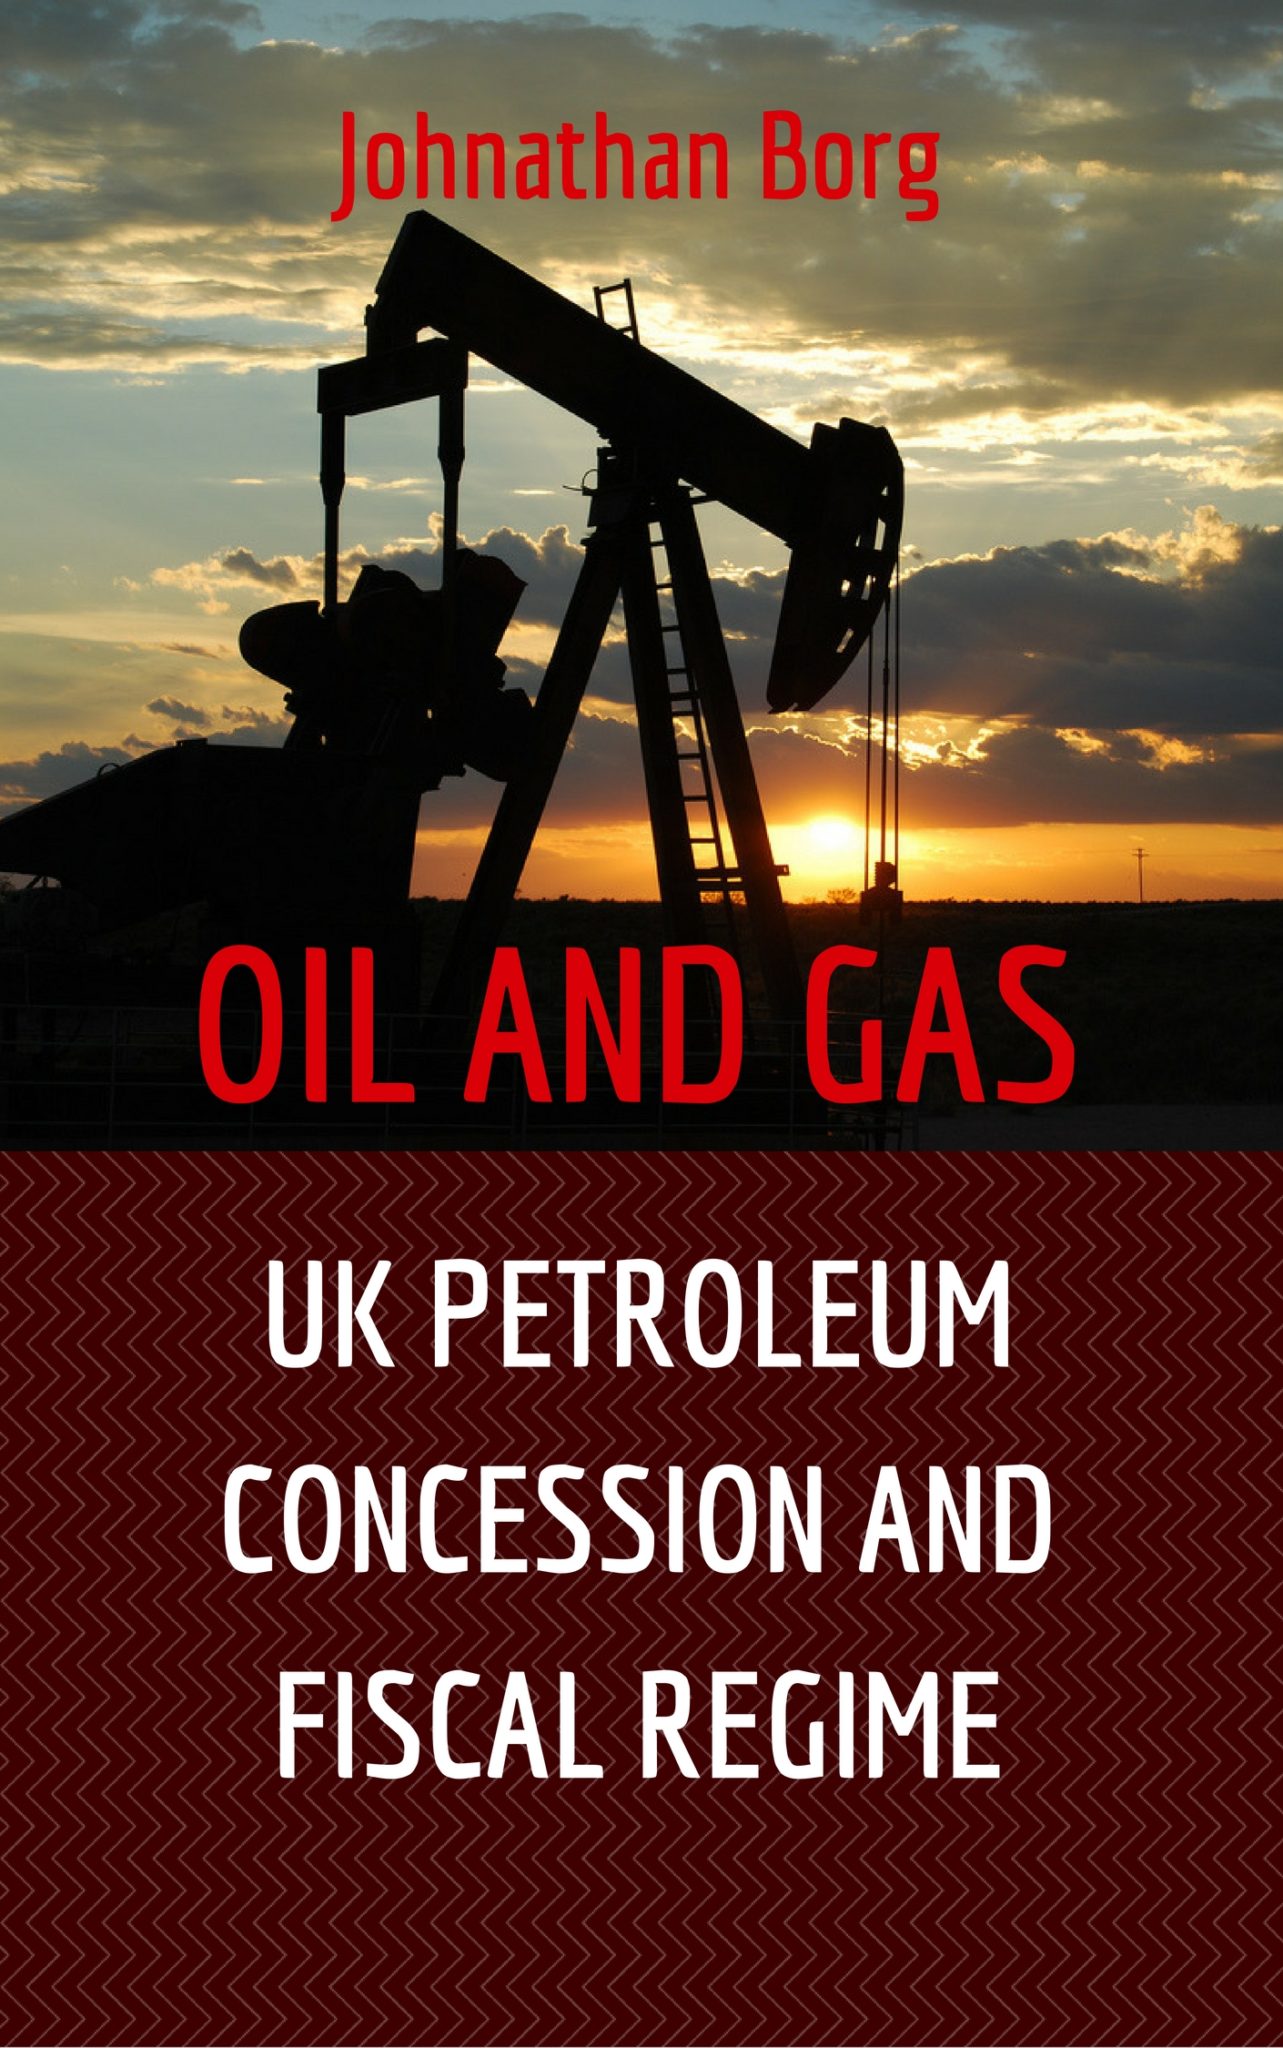 FREE: Oil and Gas Law: UK Petroleum Concession and Fiscal Regime. Comparative Analysis of UK and Russia Petroleum Taxation Included by Johnathan Borg